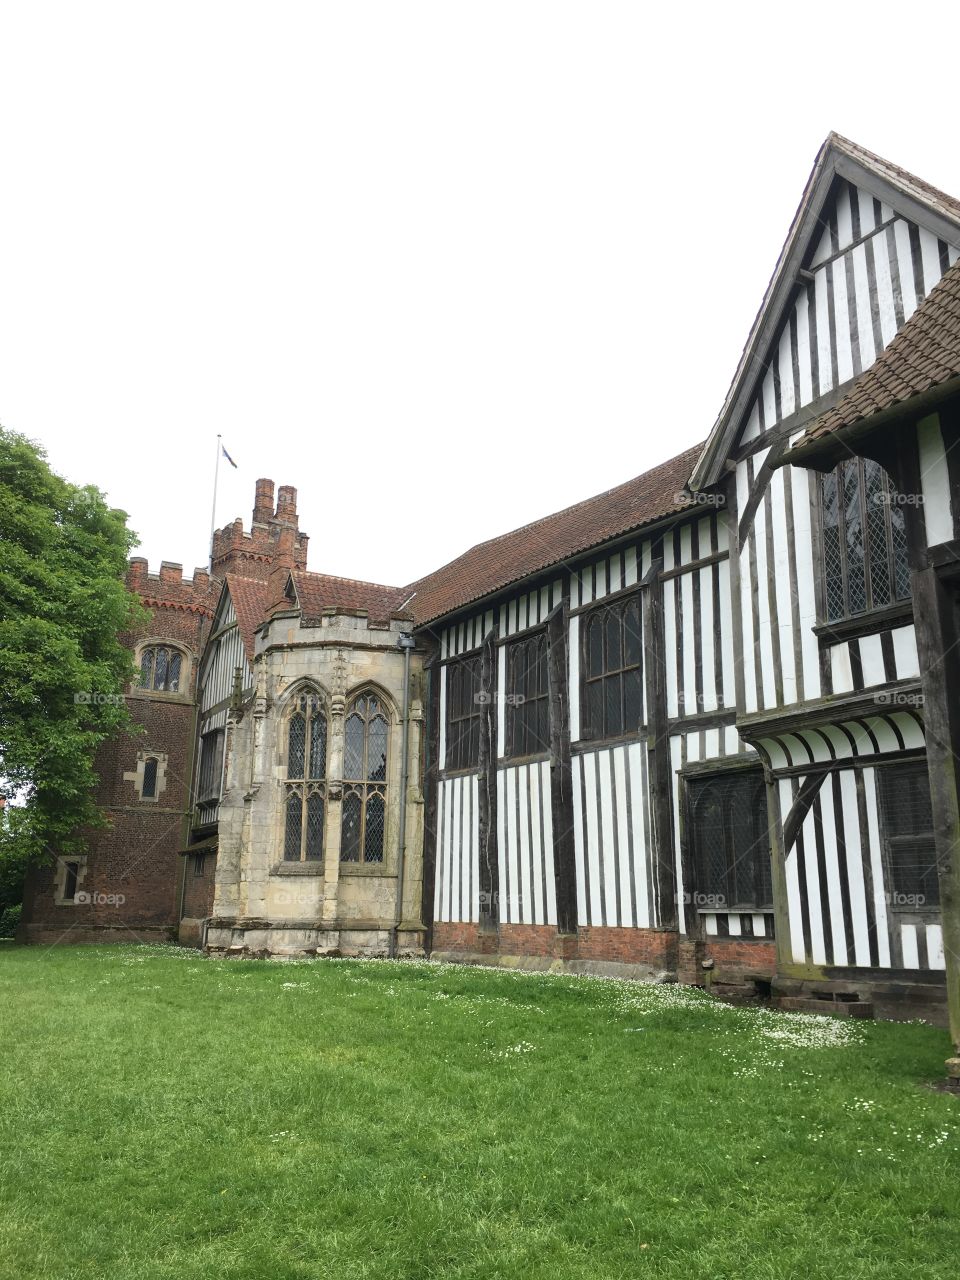 Exterior view of the brickwork and timber framing of the medieval Manor House at Gainsborough Old Hall